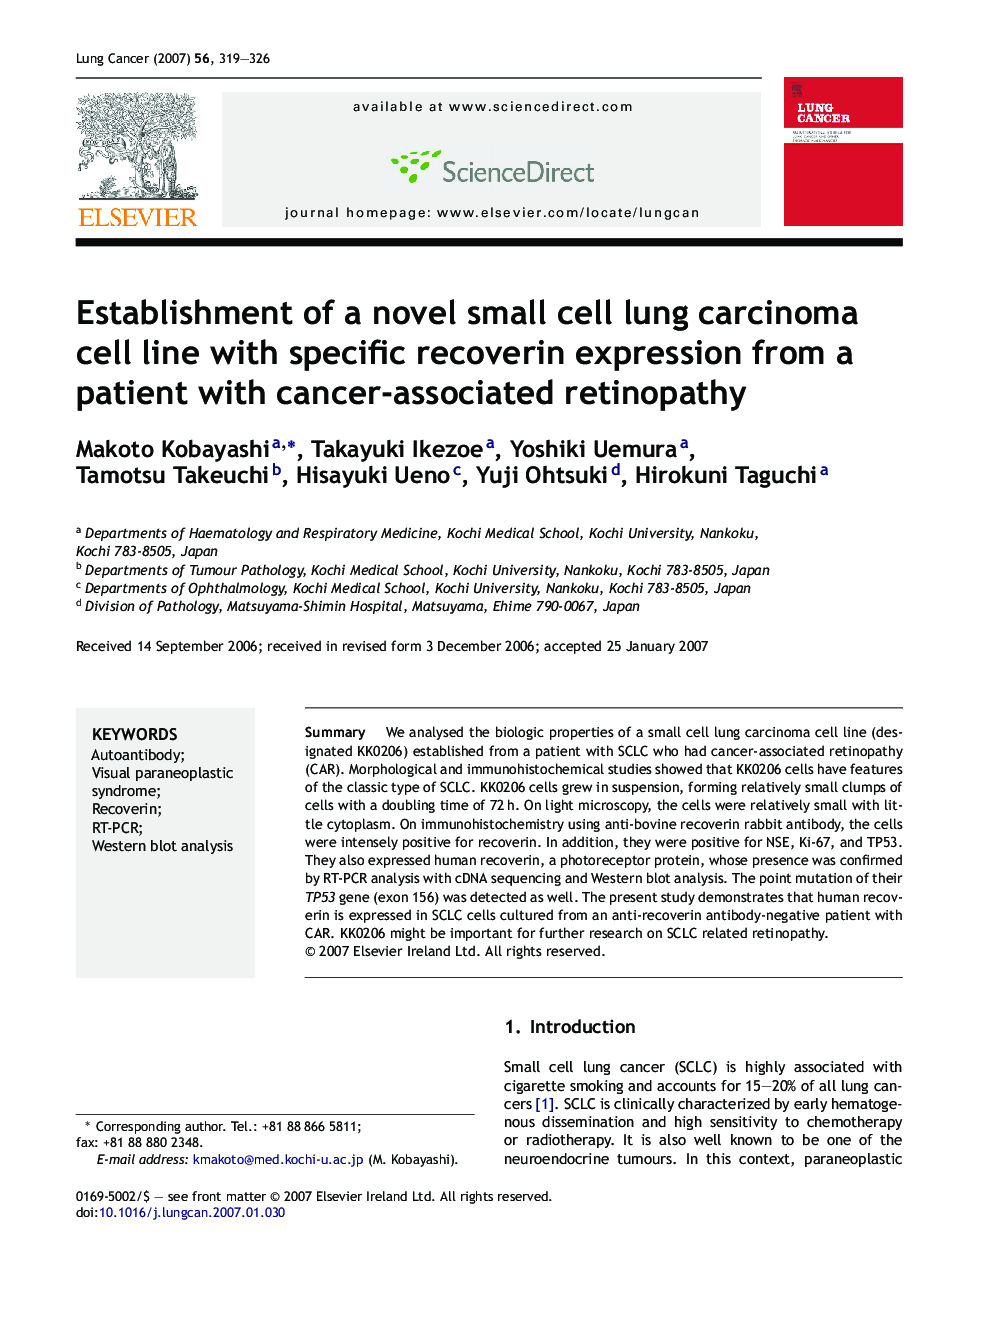 Establishment of a novel small cell lung carcinoma cell line with specific recoverin expression from a patient with cancer-associated retinopathy